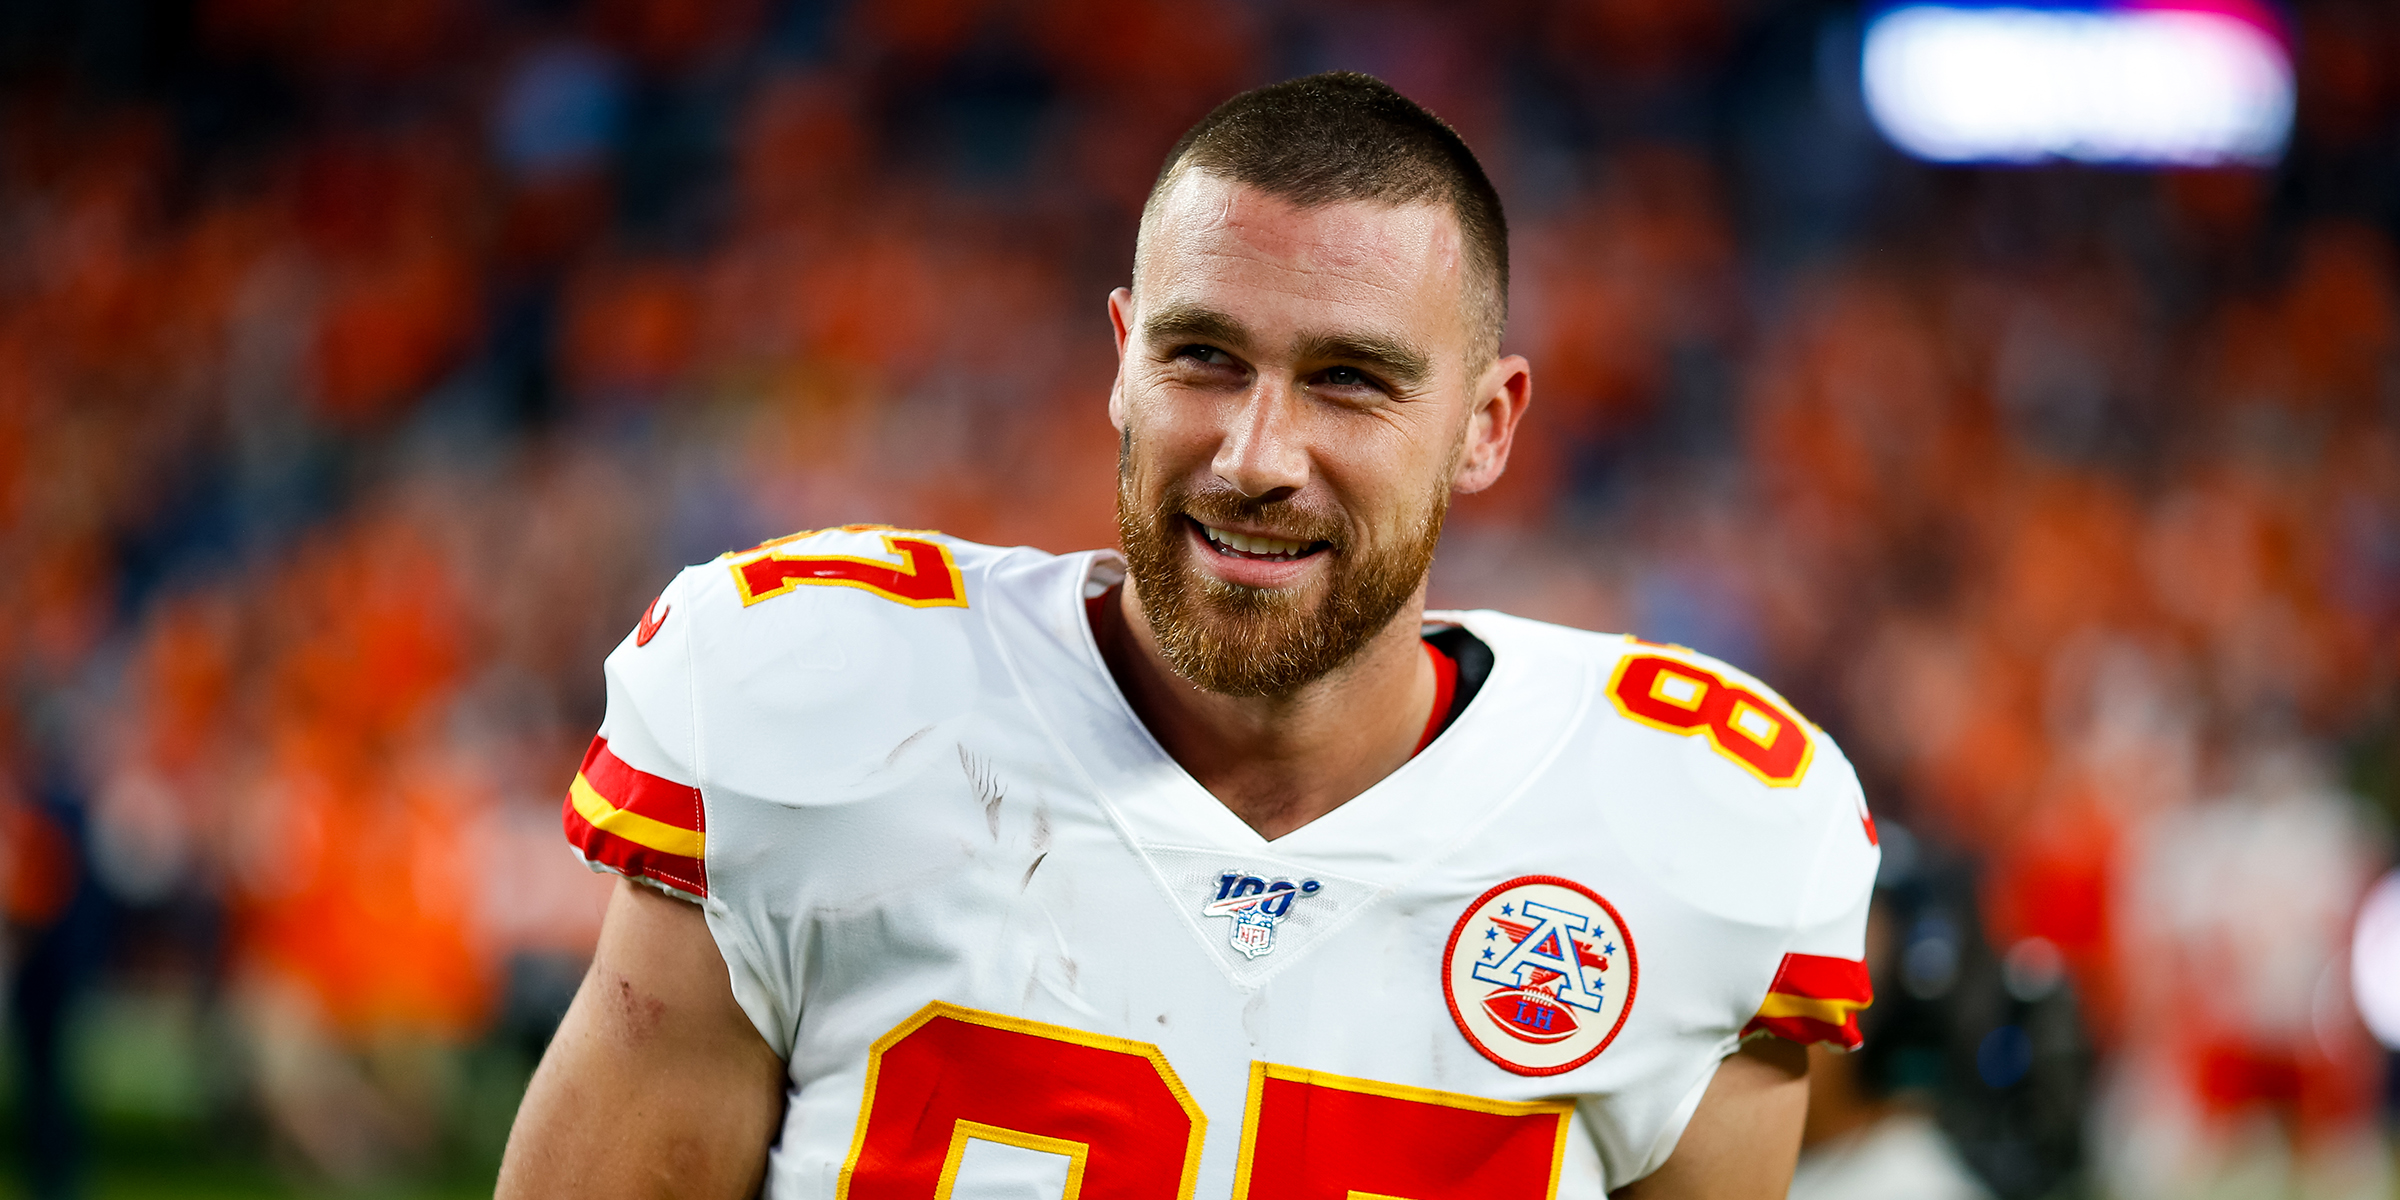 Travis Kelce 2022 Net Worth, Contract And Personal Life